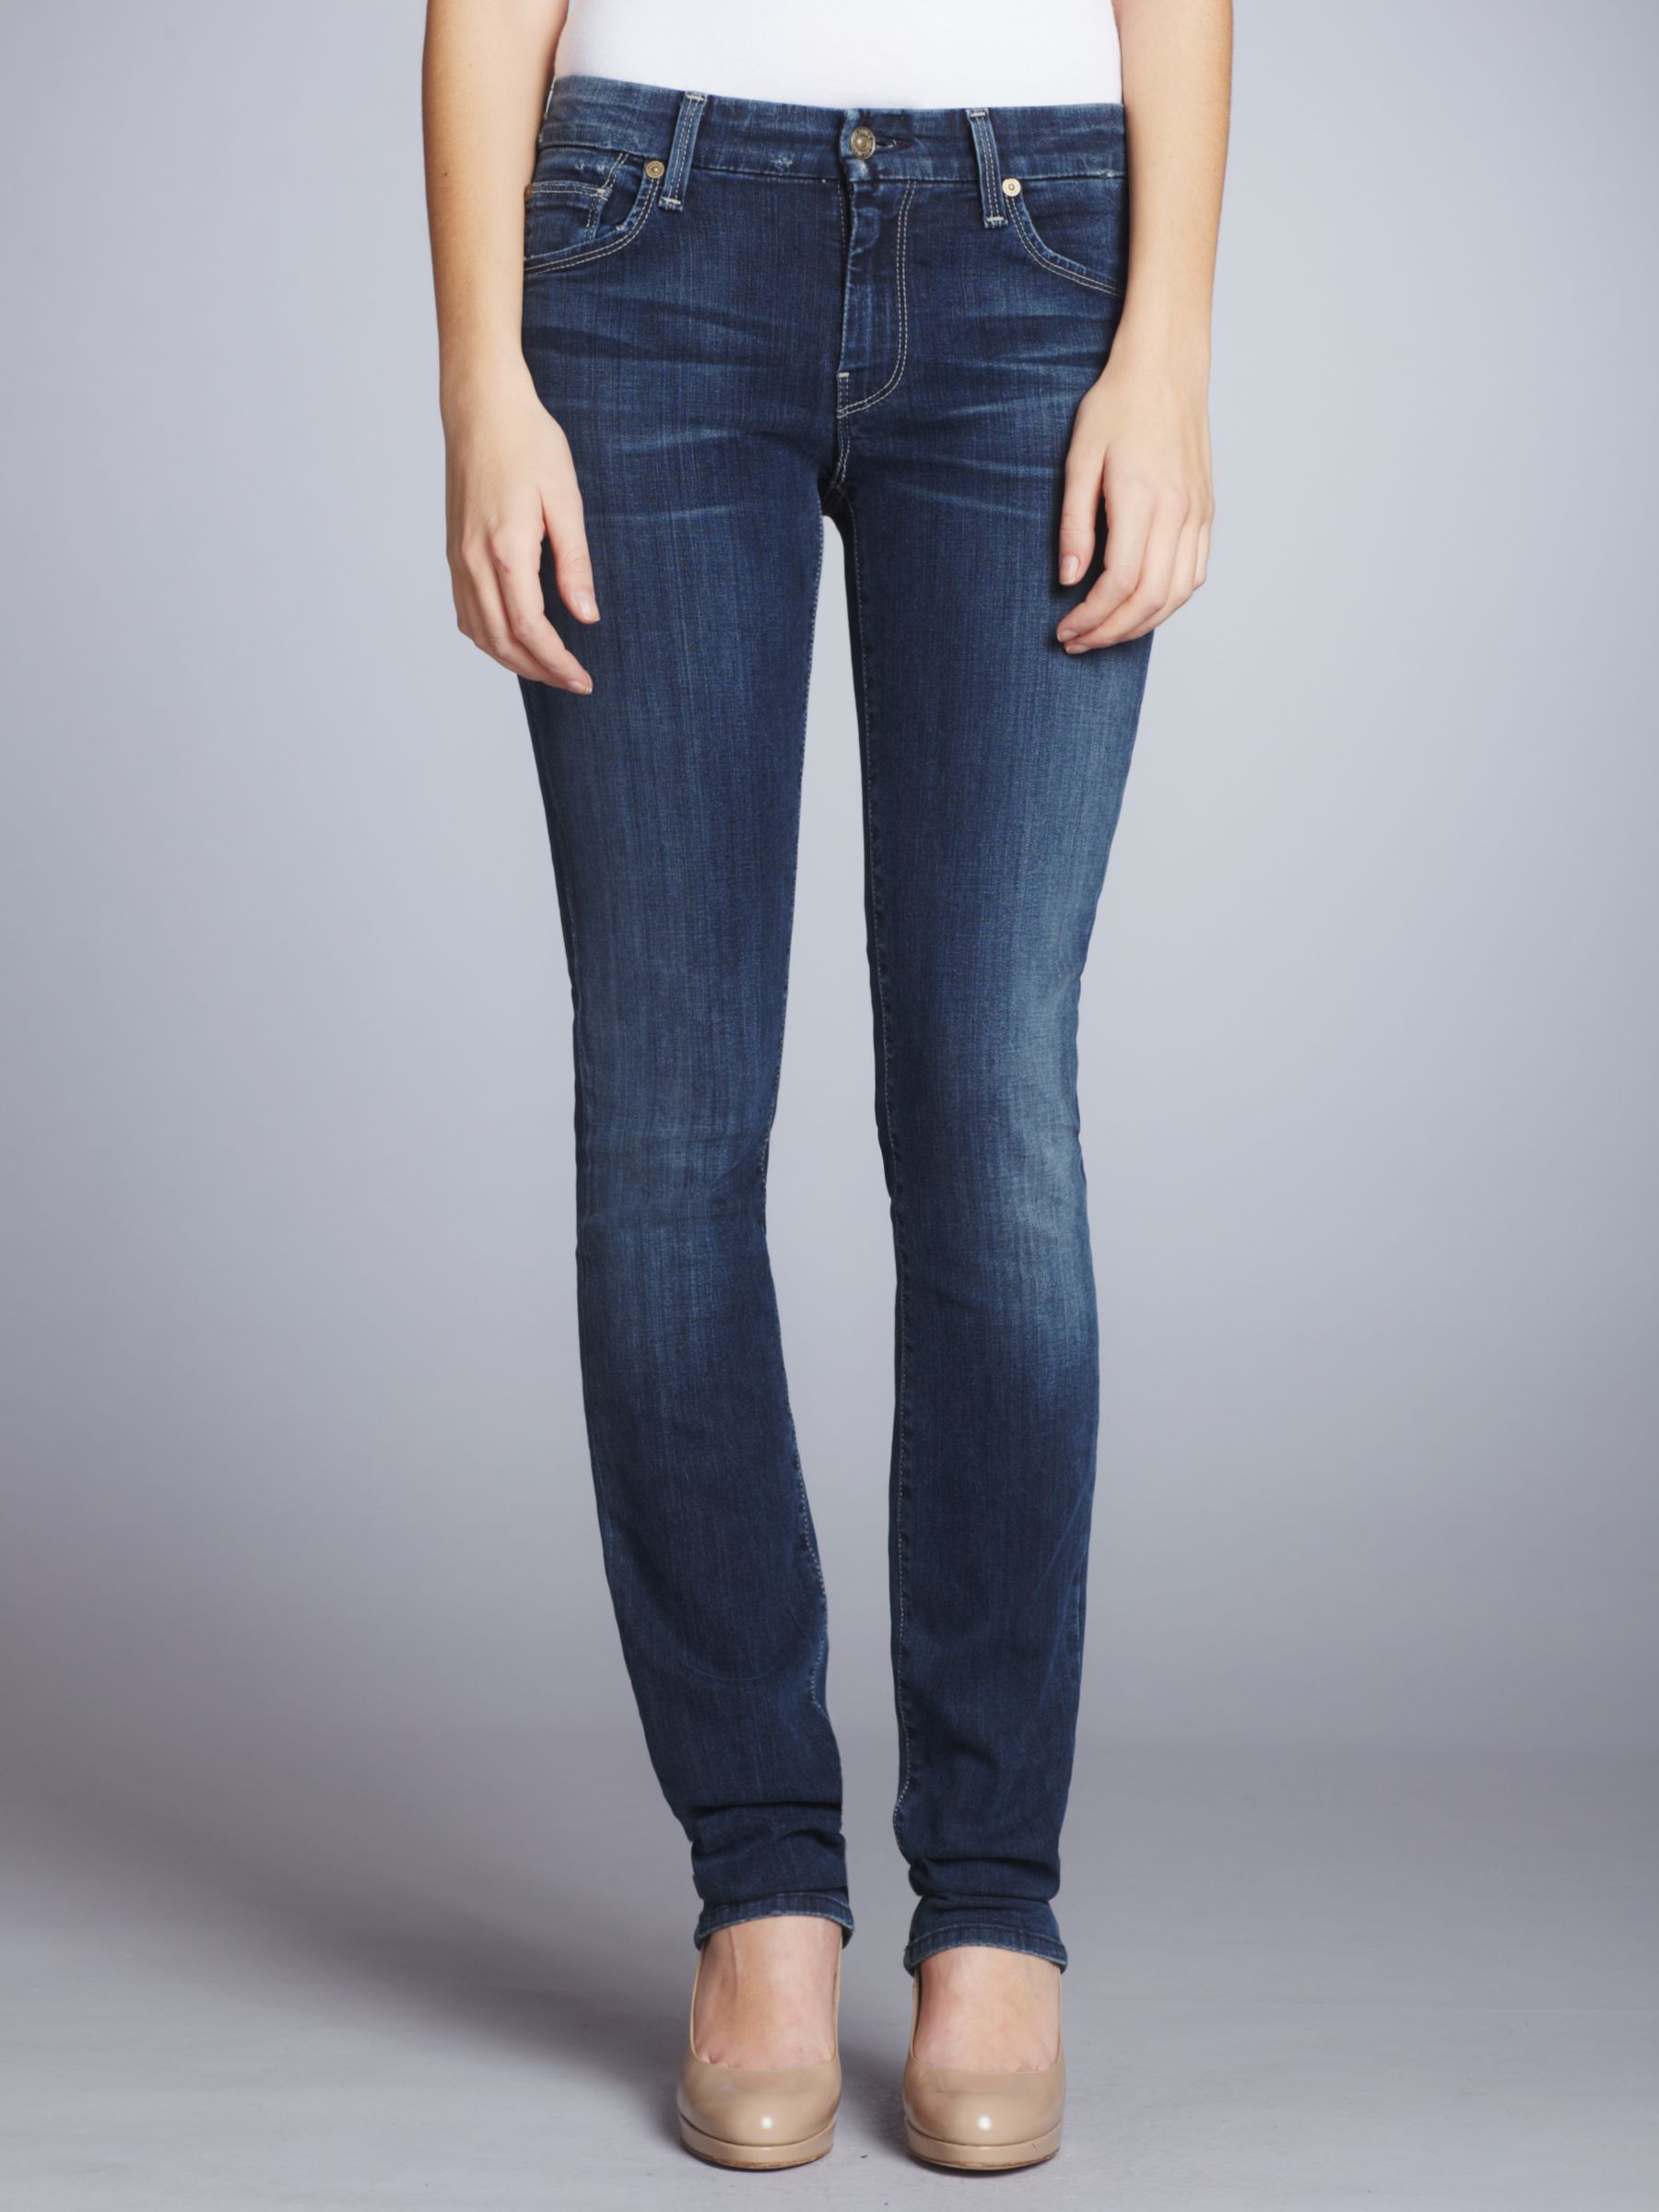 7 For All Mankind Kimmie High Rise Slim Leg Jeans, Blue at John Lewis